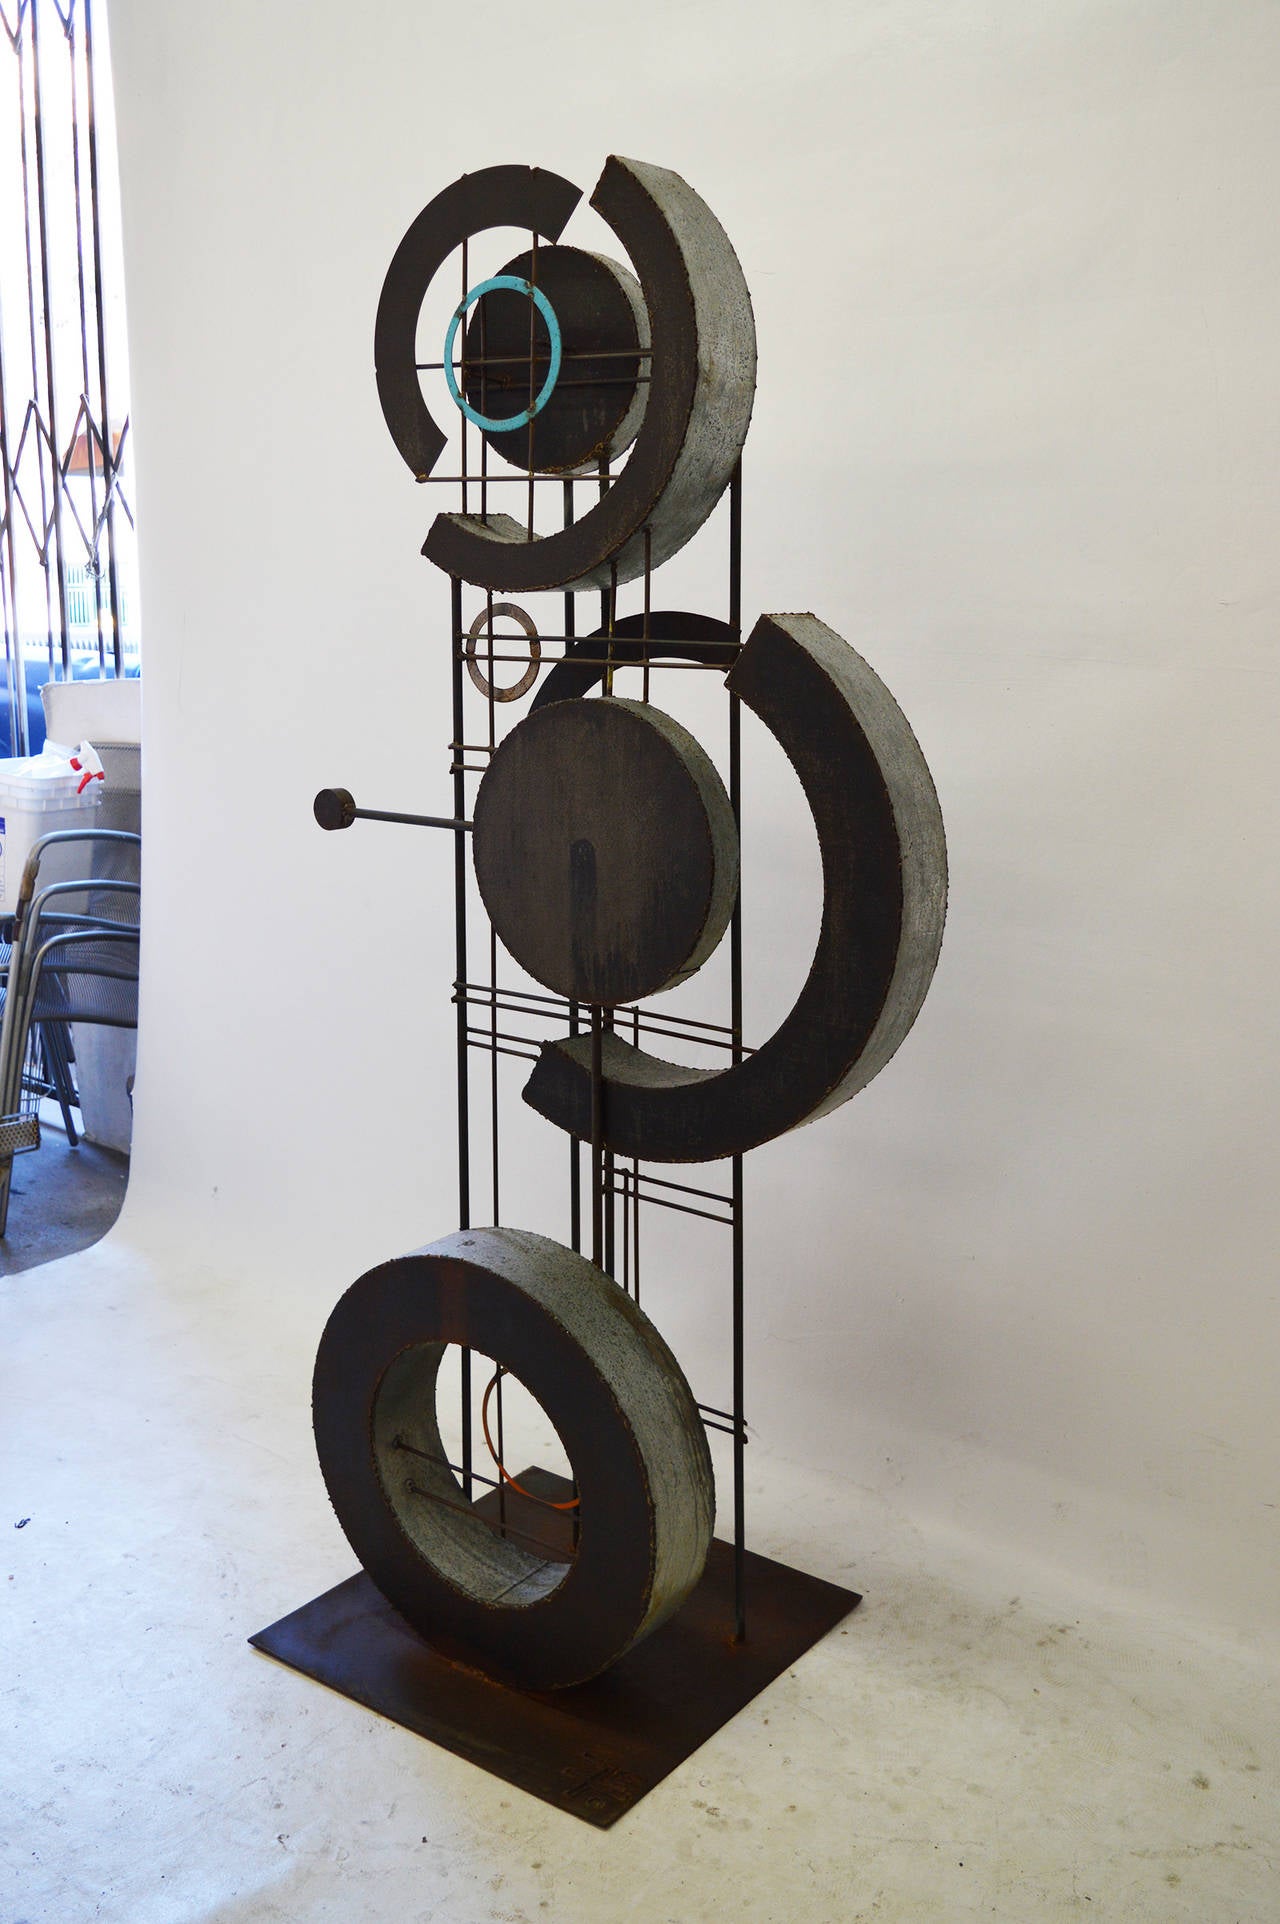 Brutalist metal sculpture with circle theme repeated with various sizes supported by vertical and horizontal steel rods and highlighted with colorful inserts.